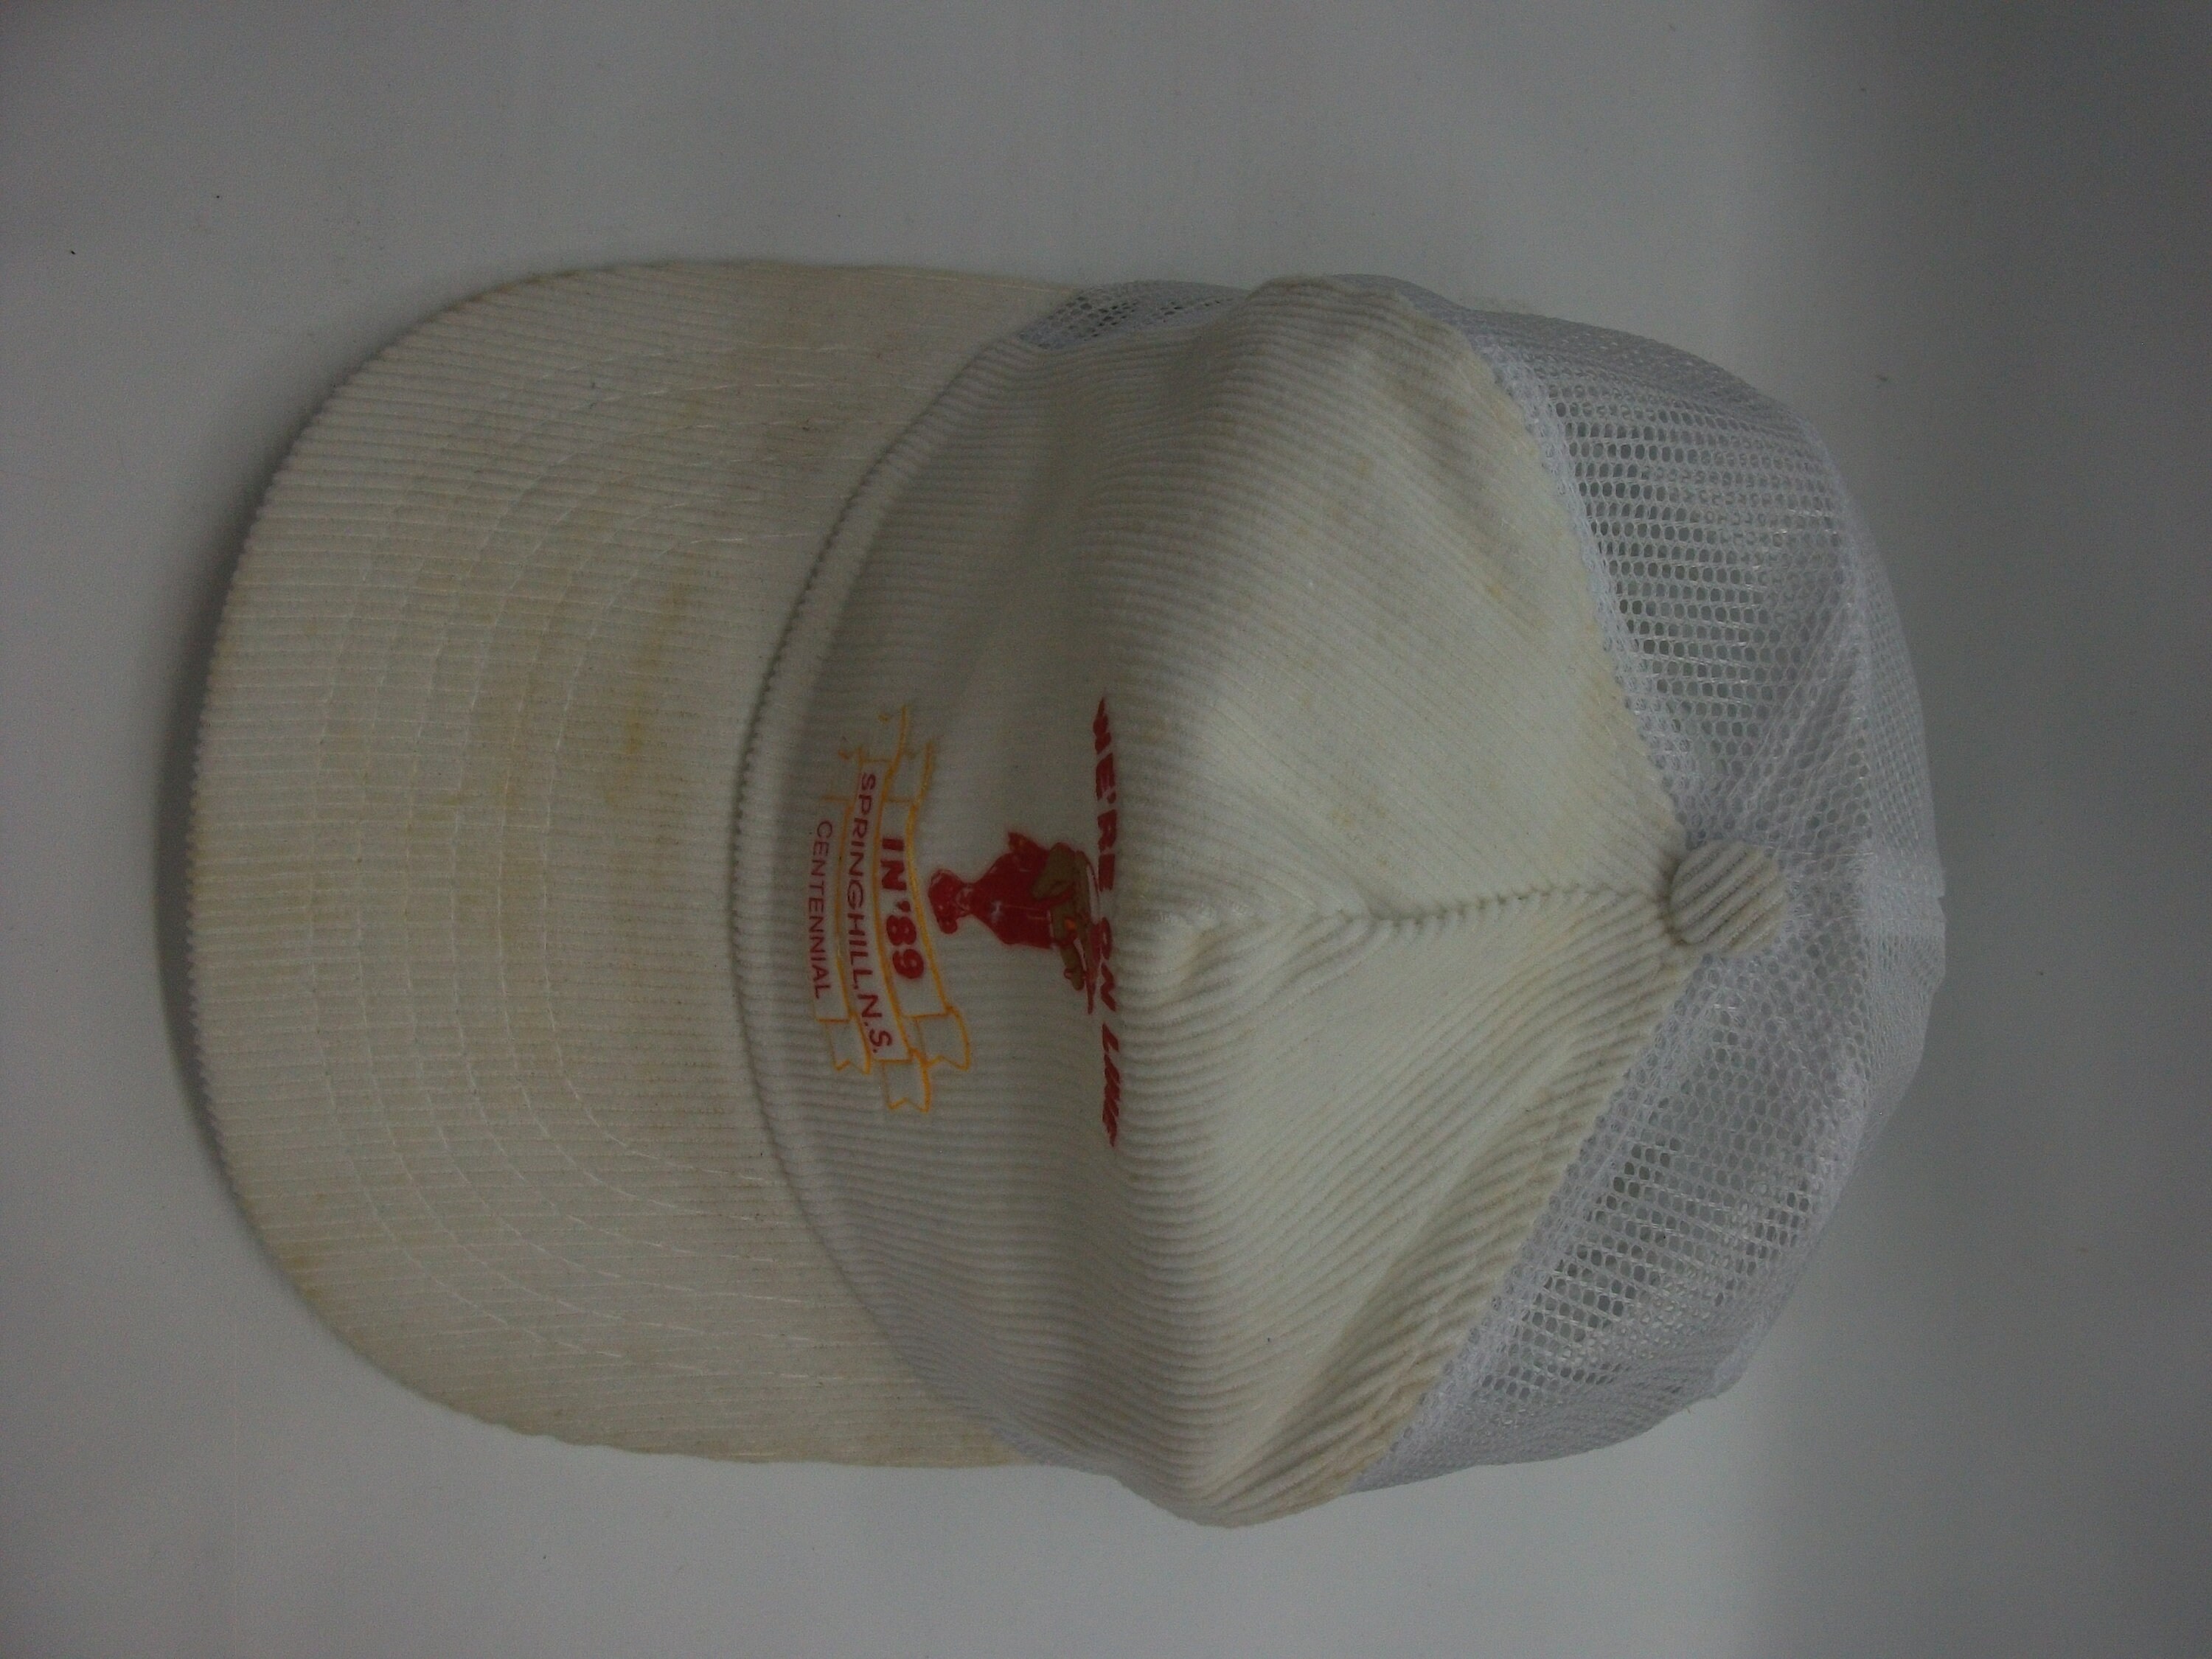 We're on Line in 89 Springhill NS Centennial Hat Vintage White Corduroy  Snapback Trucker Cap -  Canada